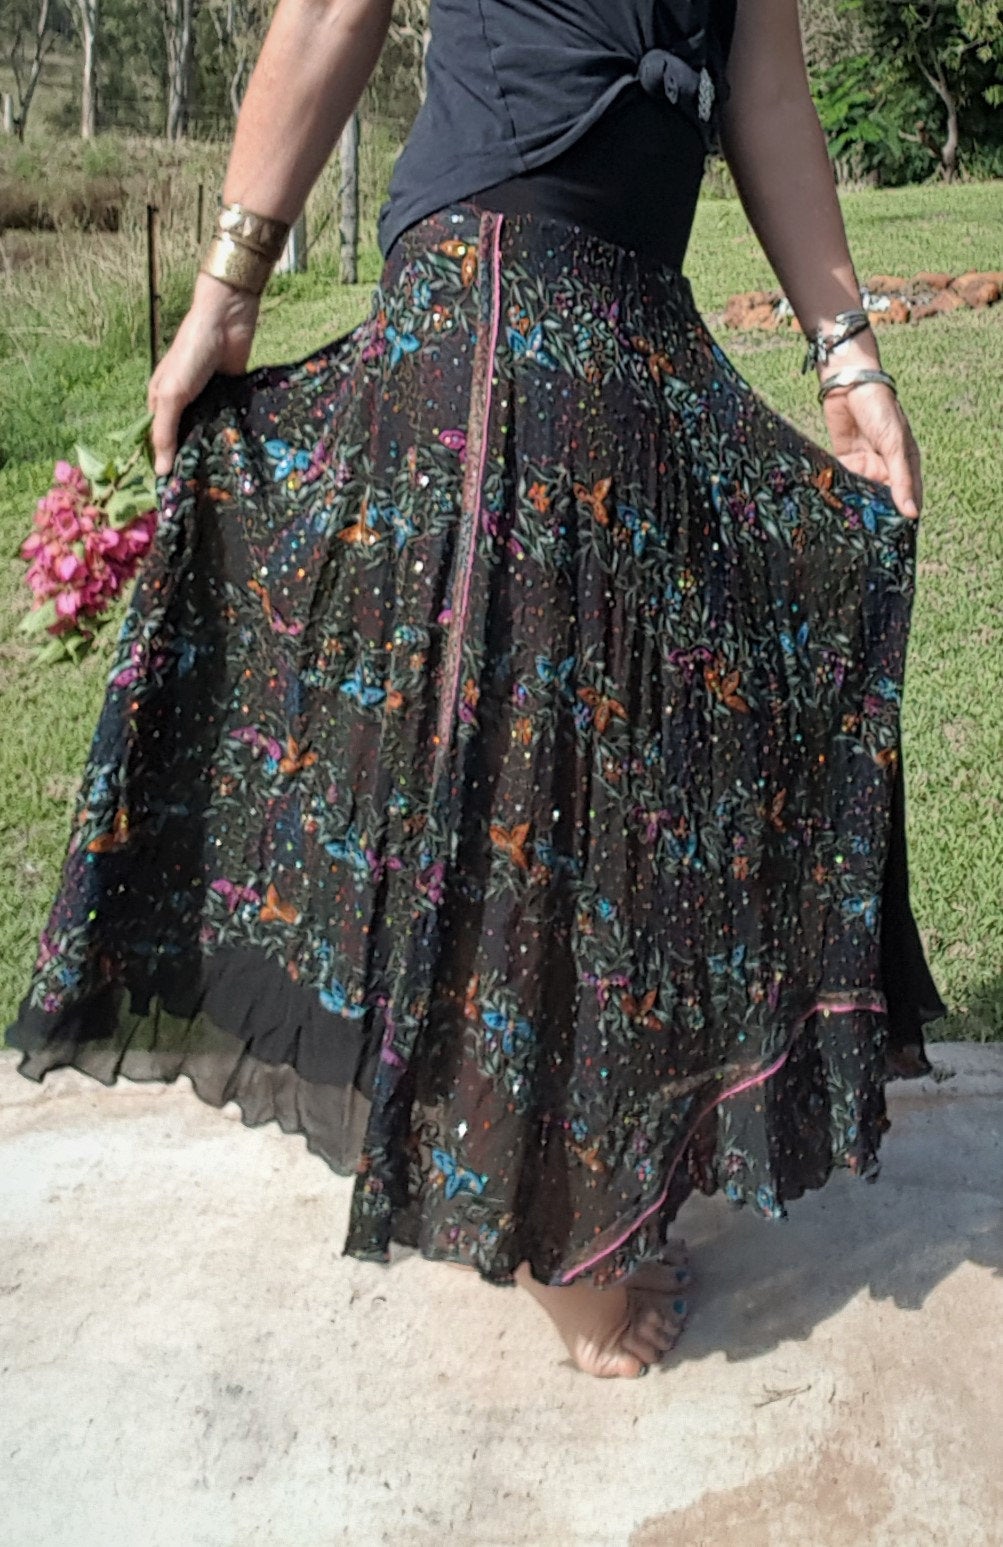 Lady wearing upcycled silk skirt maxi in black